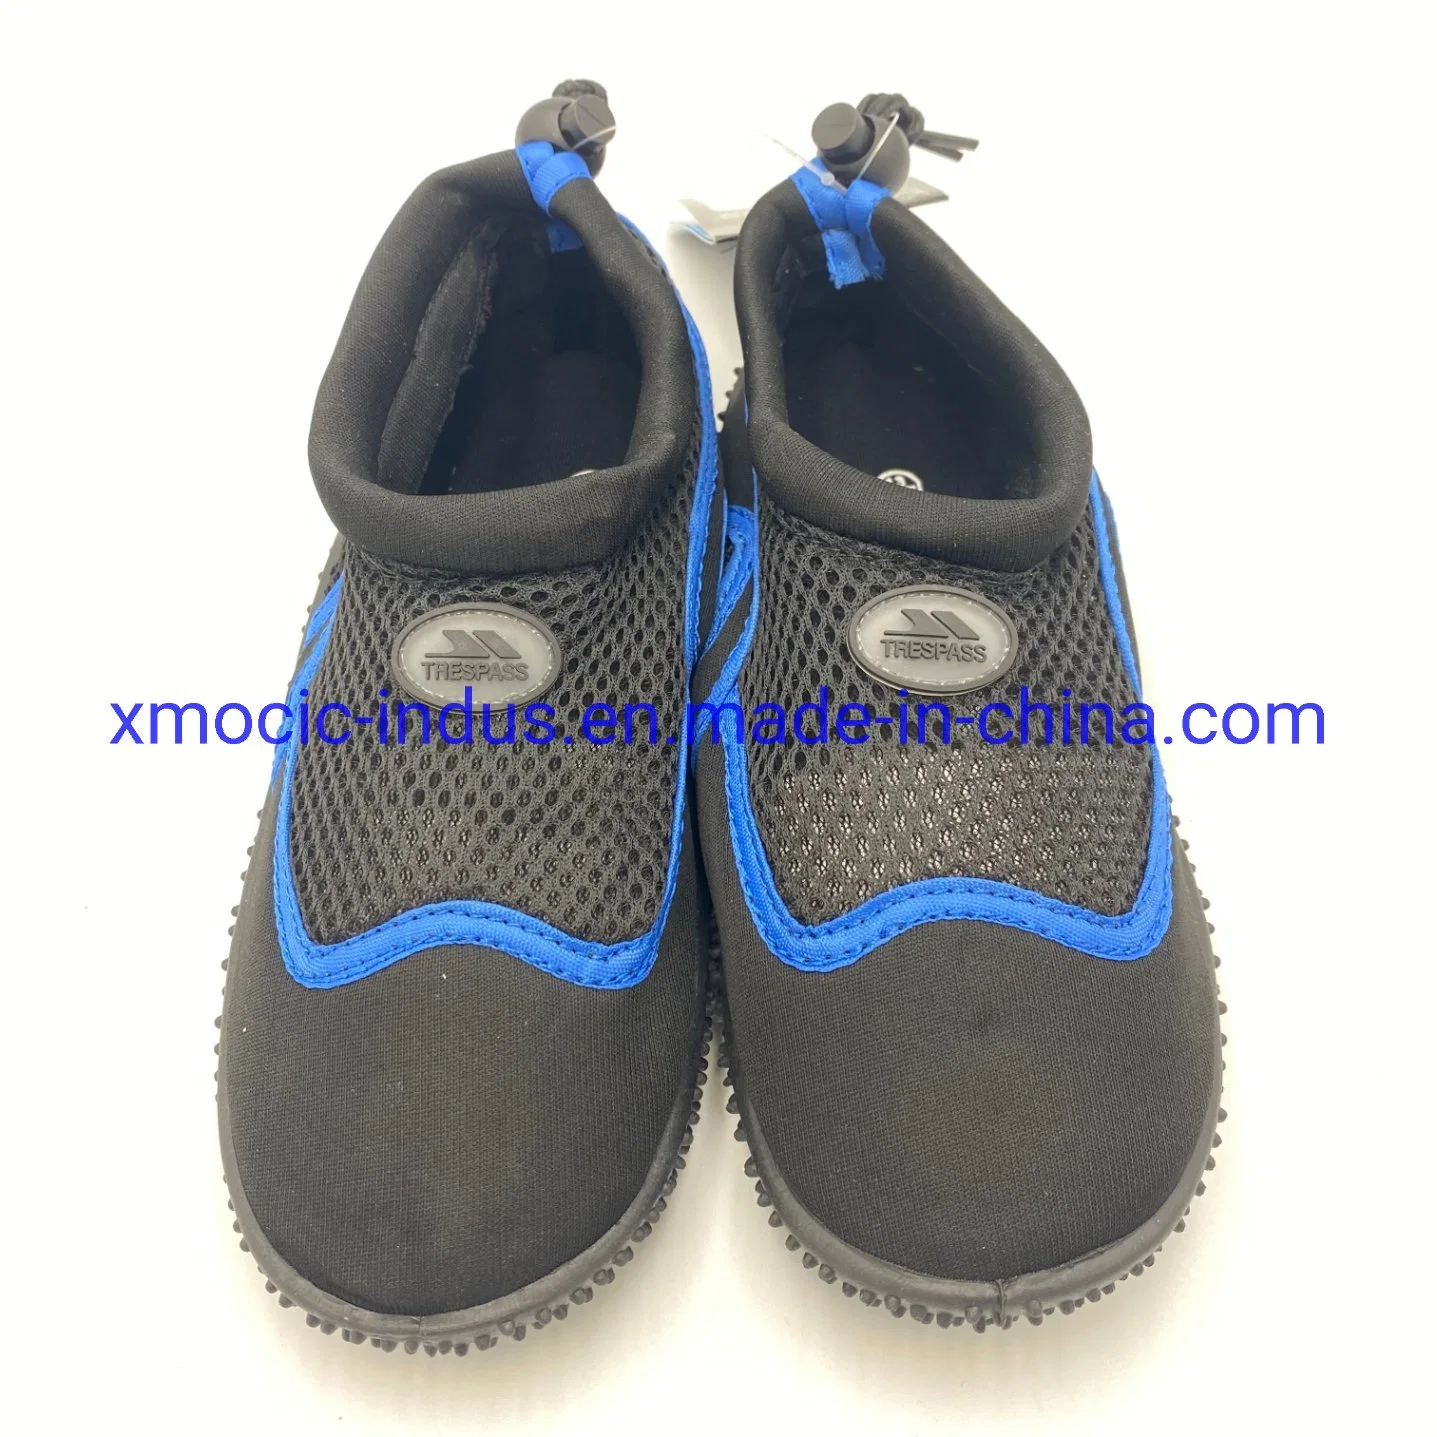 New Custom Swimming Rubber Aqua Shoes Breathable Soft Barefoot Outdoor Beach Nonslip Fitness Diving Sneaker Surf Shoes